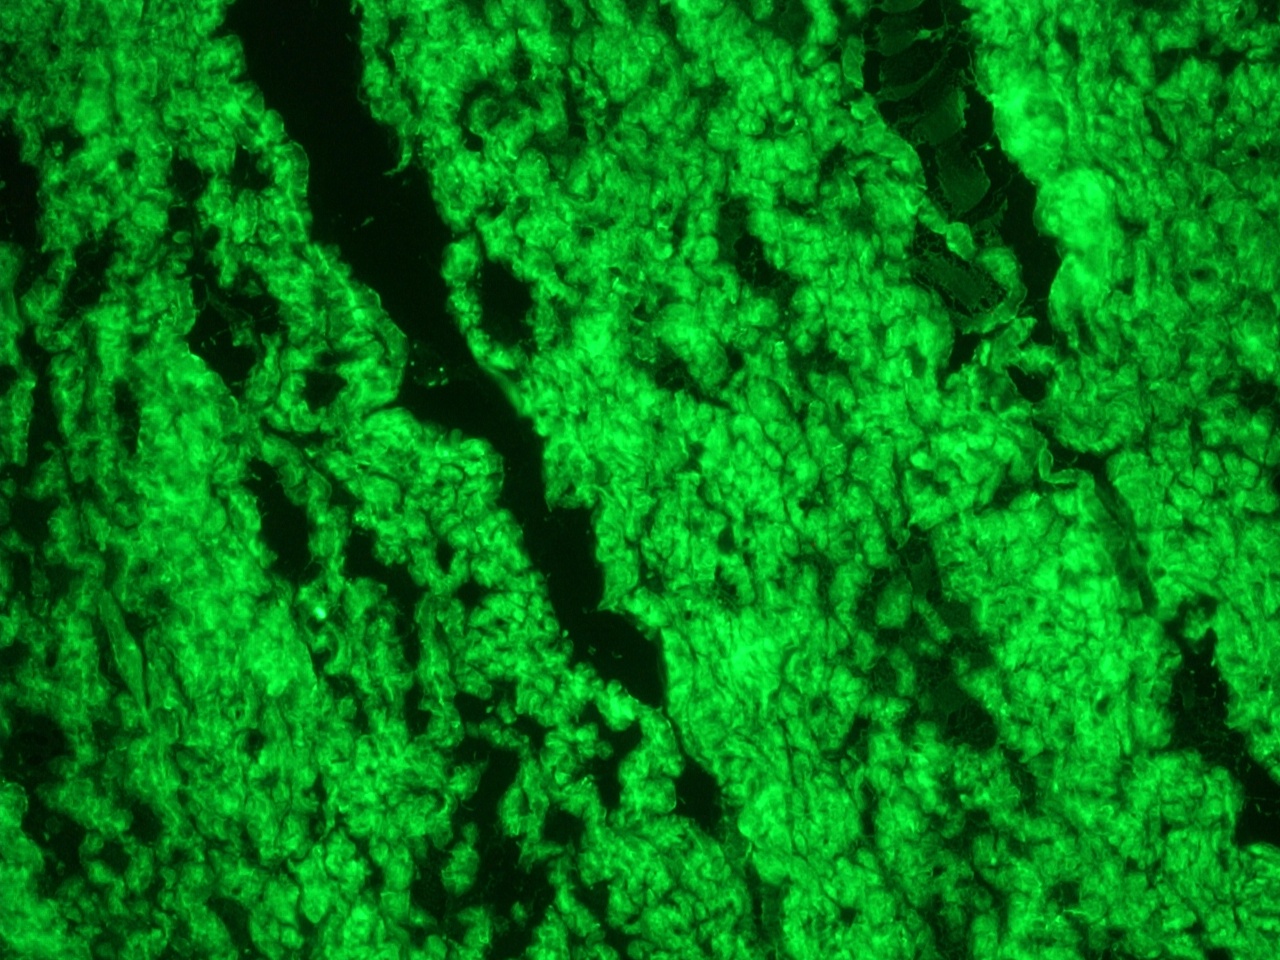 Figure 9. Indirect immunofluorescence staining of smoothelin in human colon smooth muscle cells using MUB1700P (clone R4A) at a dilution of 1:500.